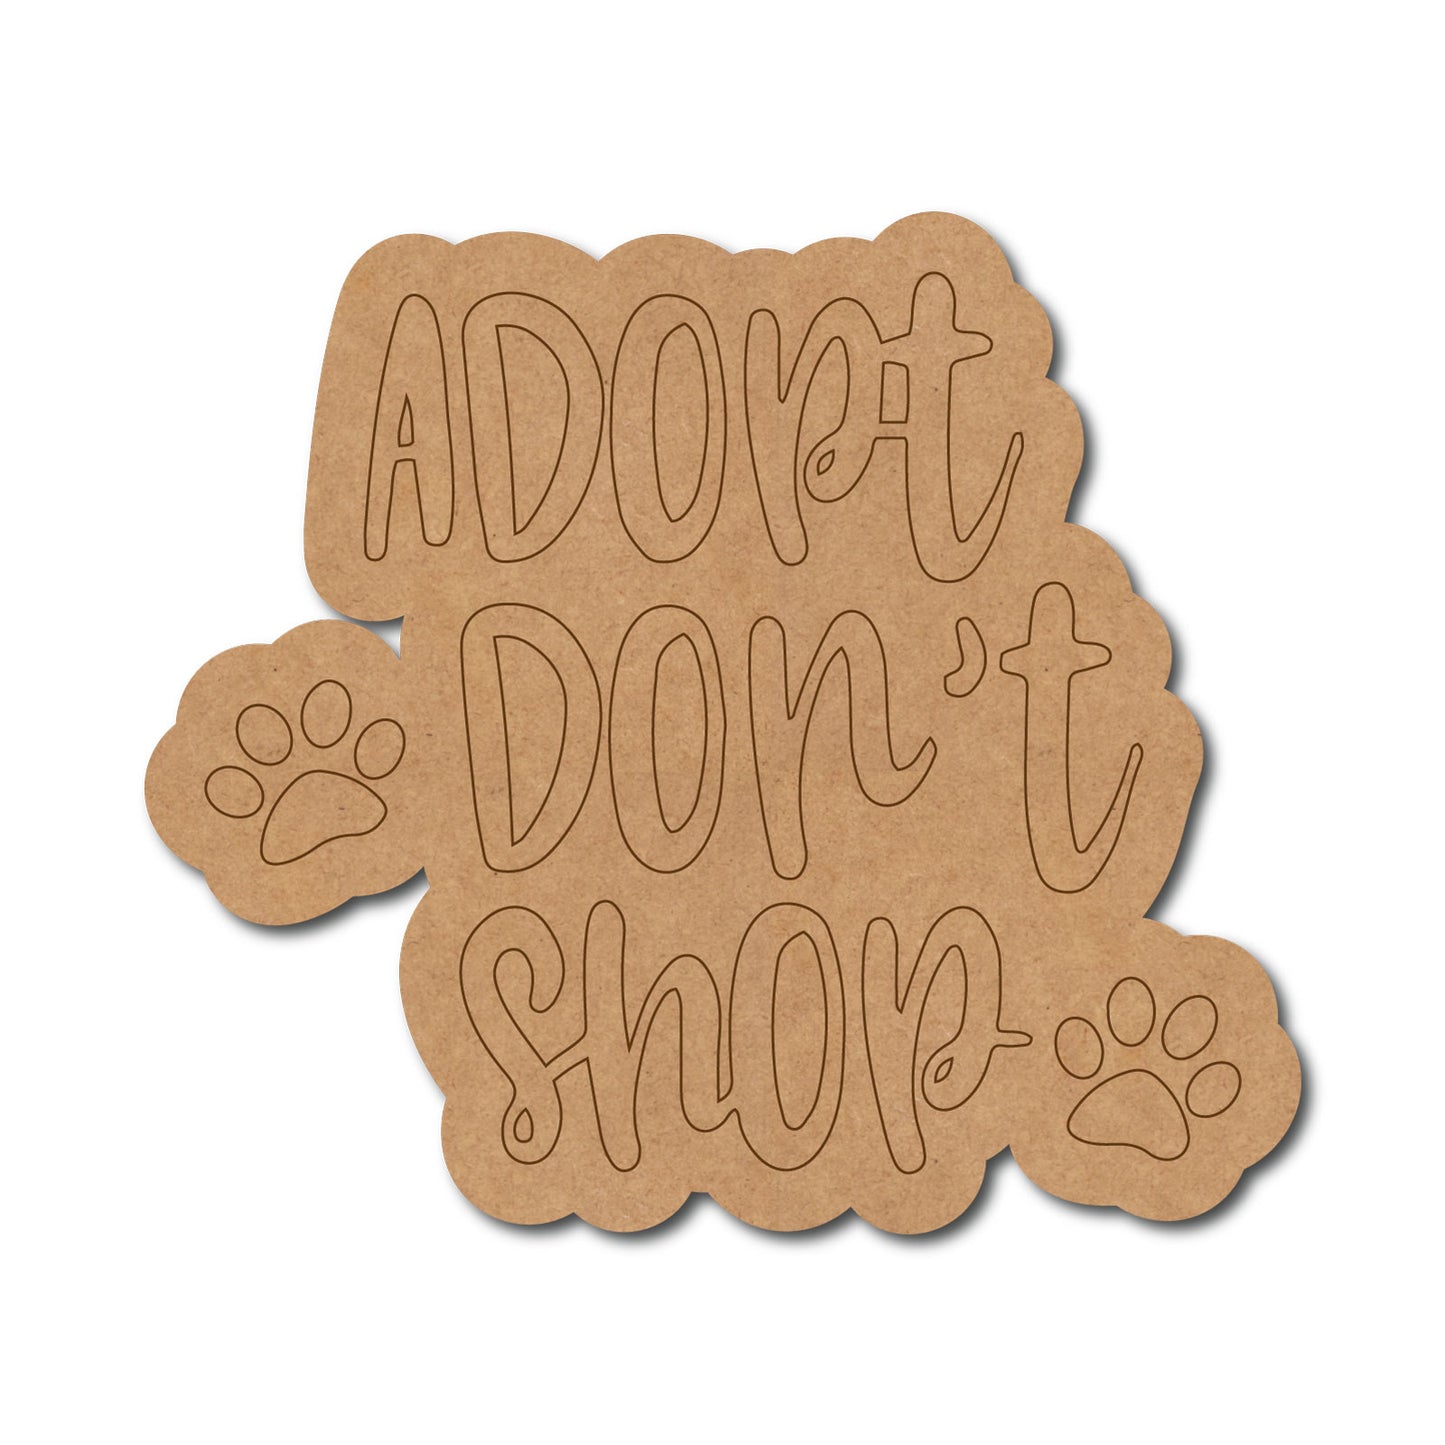 Adopt Don't Shop Text Pre Marked Base MDF Design 1